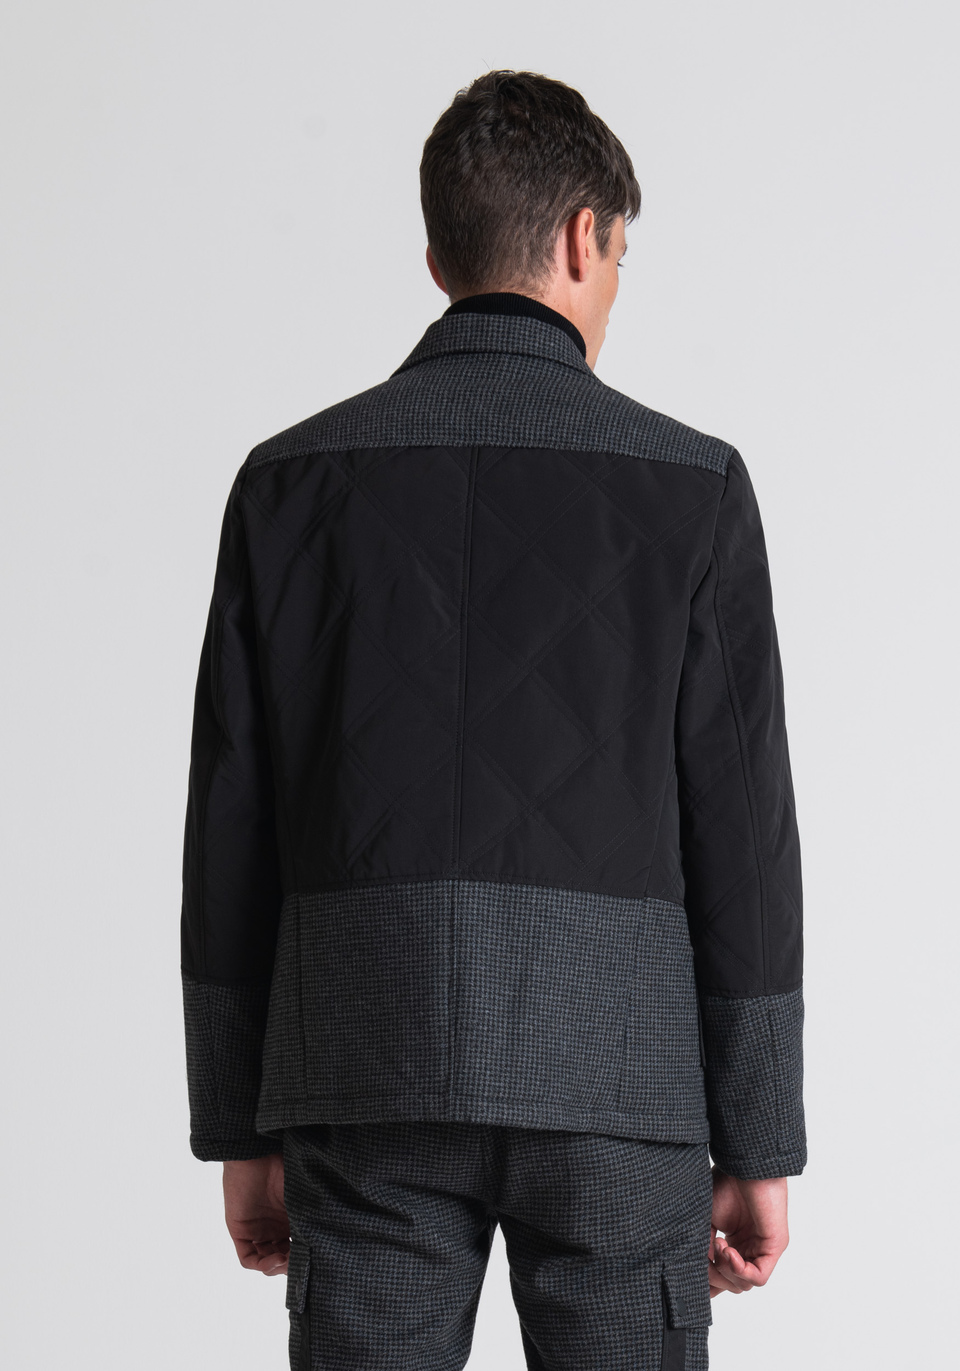 "DIANA" REGULAR FIT JACKET WITH WOOL PATCH - Antony Morato Online Shop